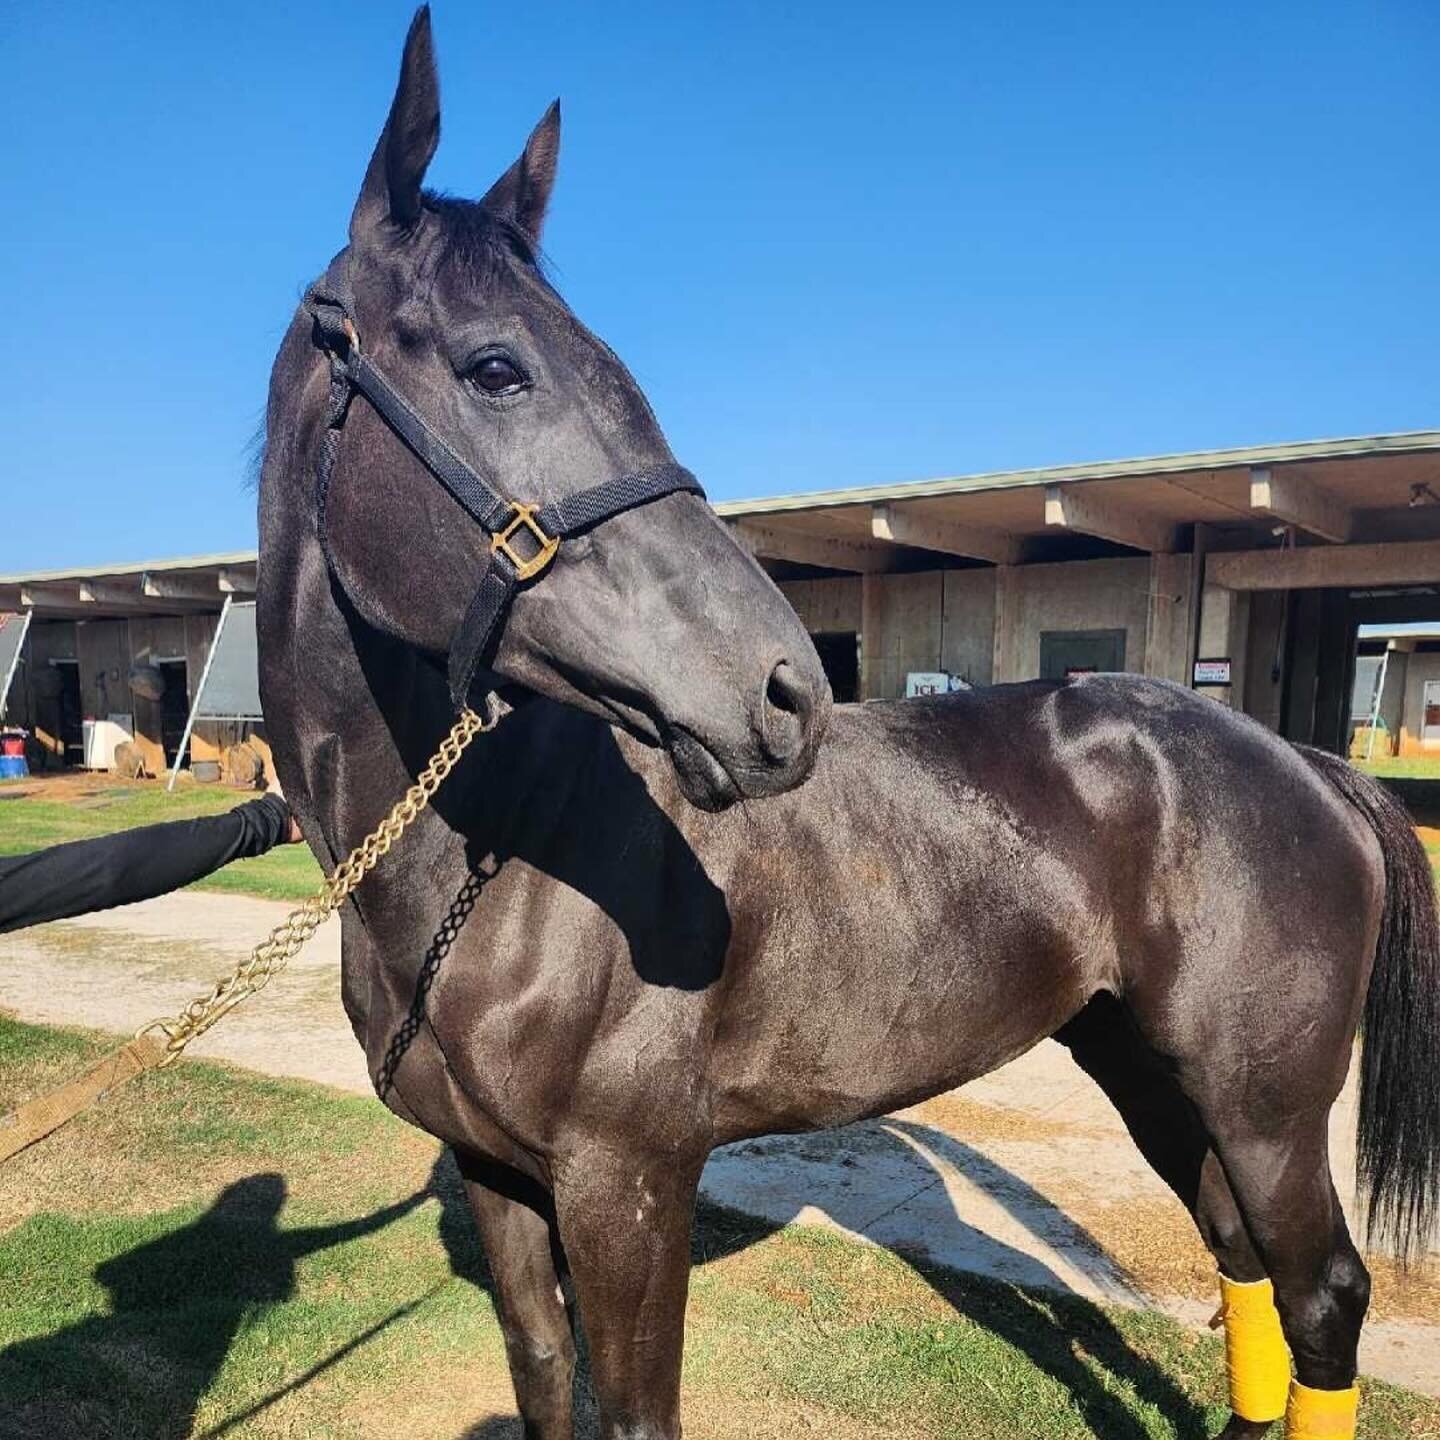 This 6 year old OTTB mare is full of potential waiting for her next opportunity. 
🐴: Maize
📍: Houston, Texas